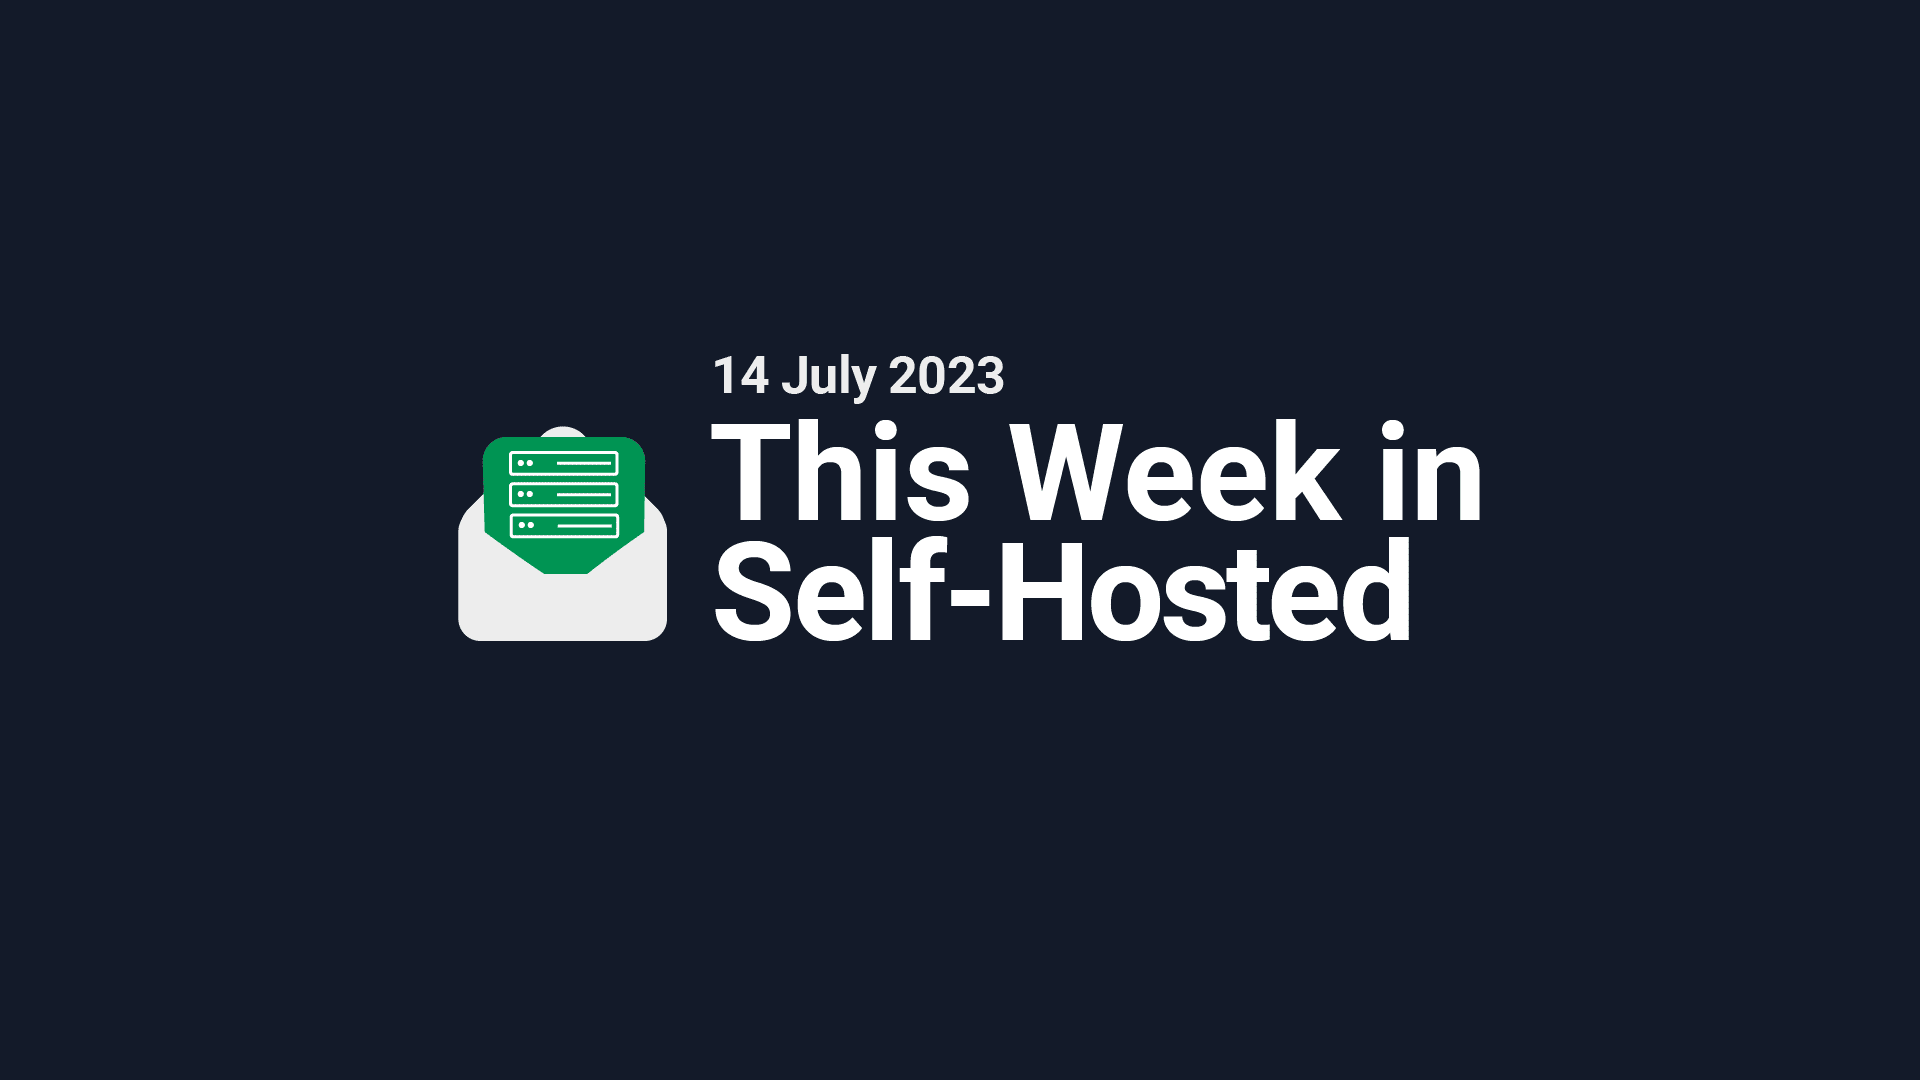 This Week in Self-Hosted (14 July 2023) Post image